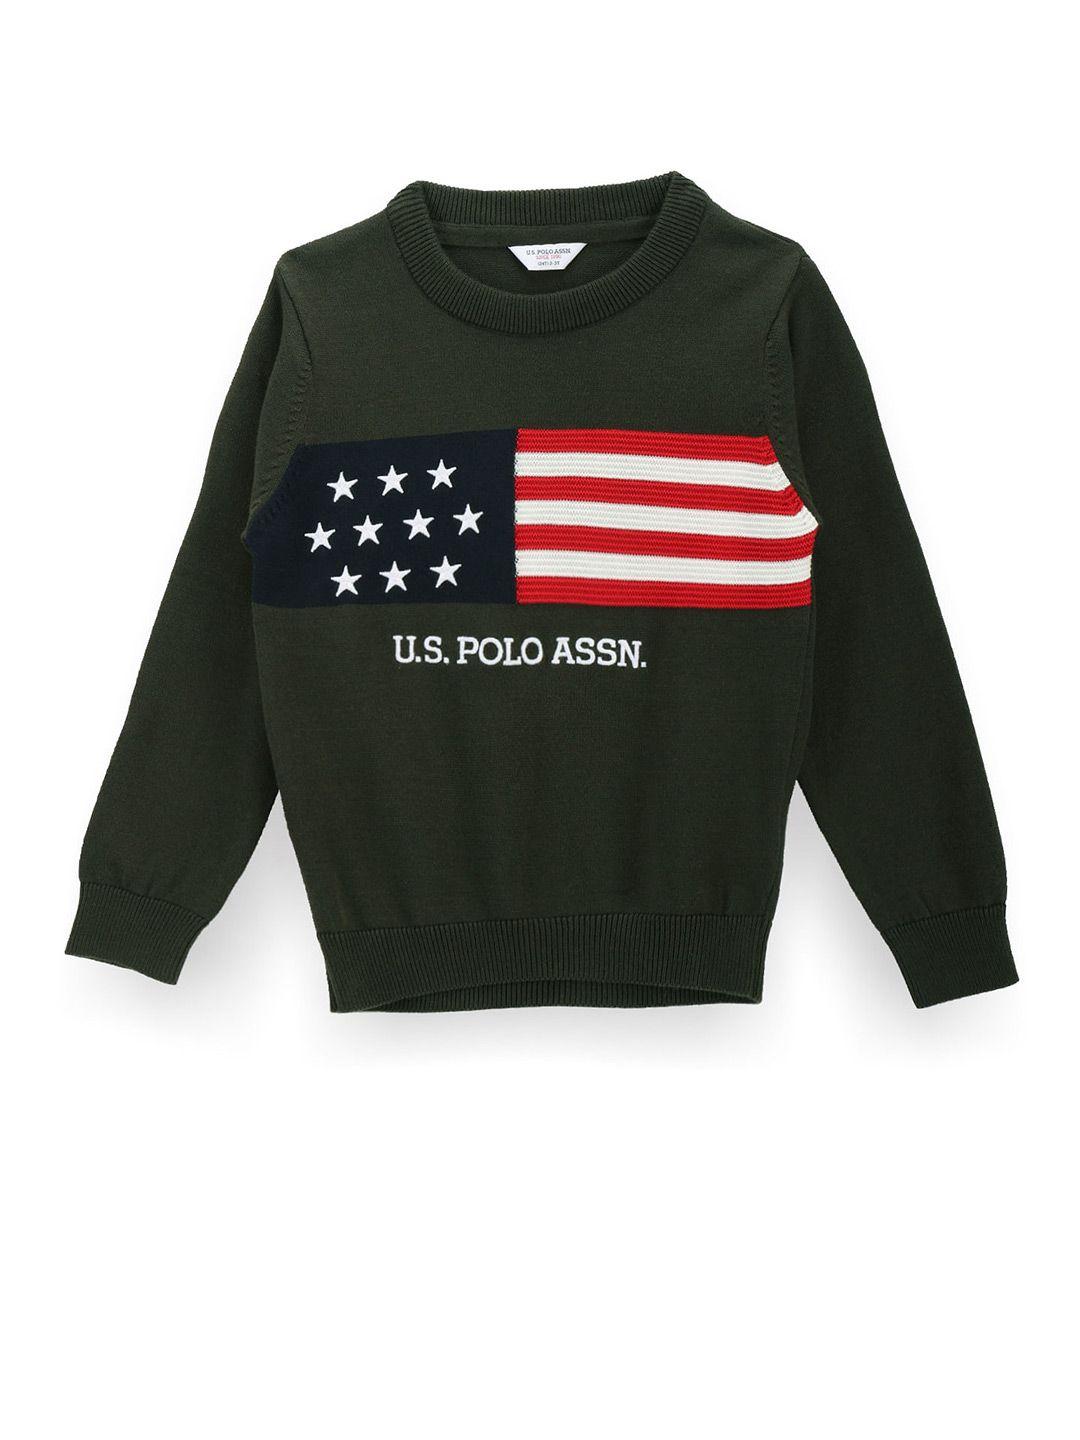 u.s. polo assn. kids boys graphic printed pure cotton pullover